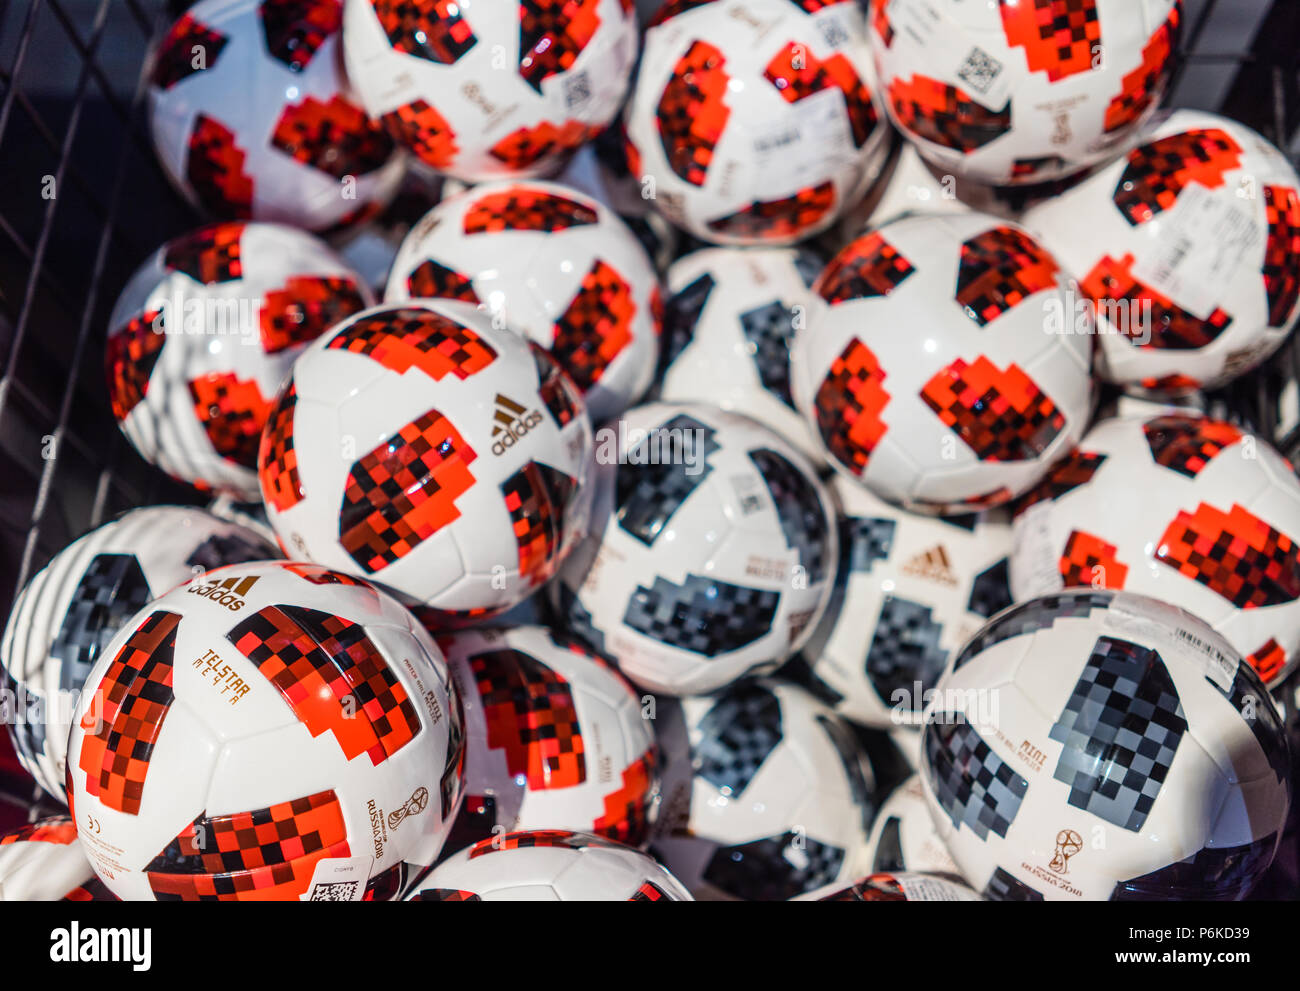 June 30, 2018. The official ball for the FIFA World Cup 2018 football  playoff games Adidas Telstar Mechta Stock Photo - Alamy